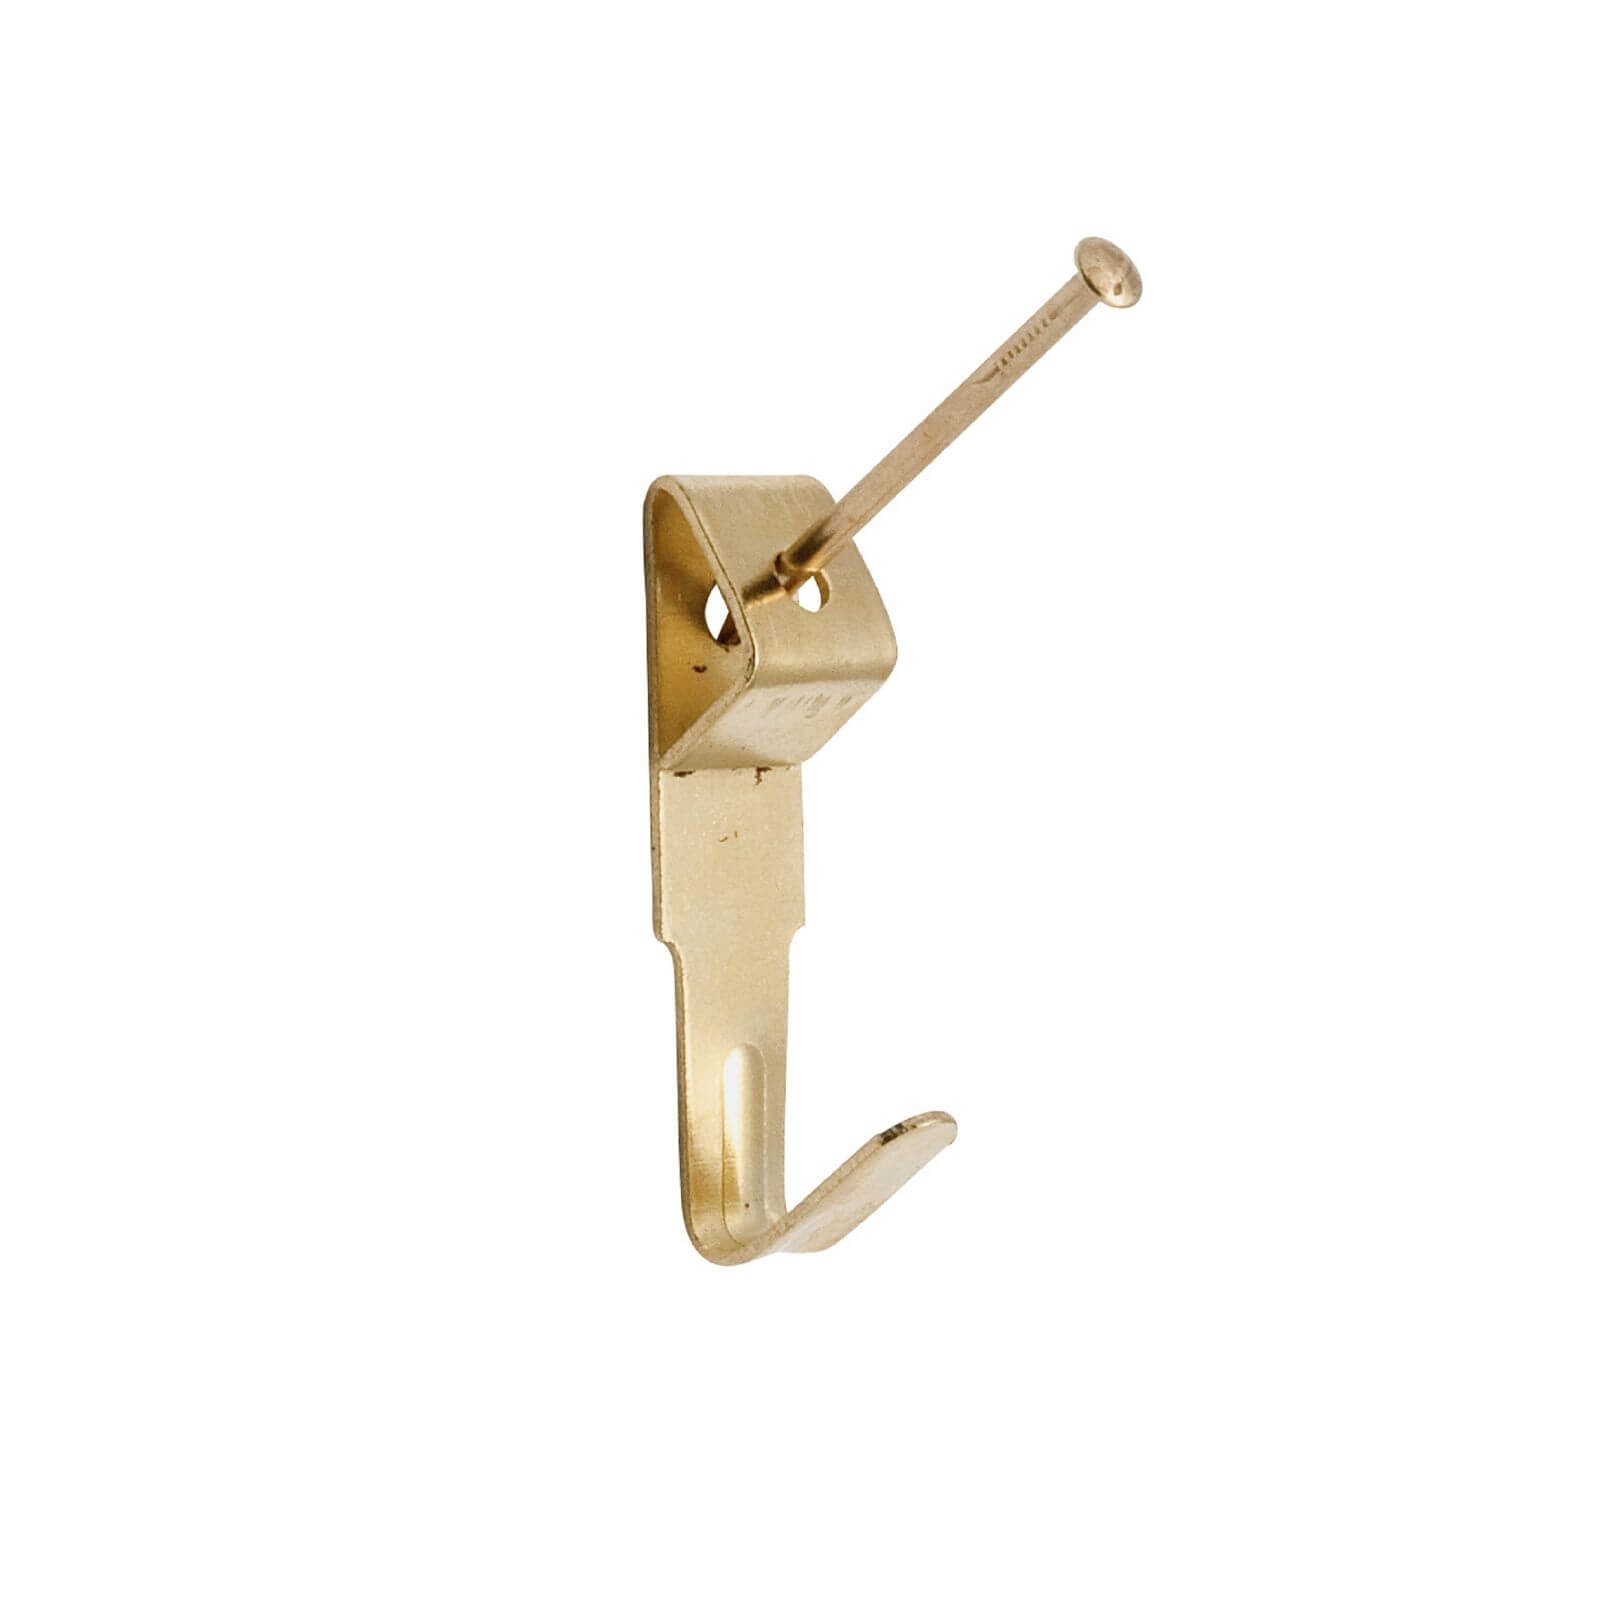 Picture Hook - Brass Plated - Medium - 25 Pack